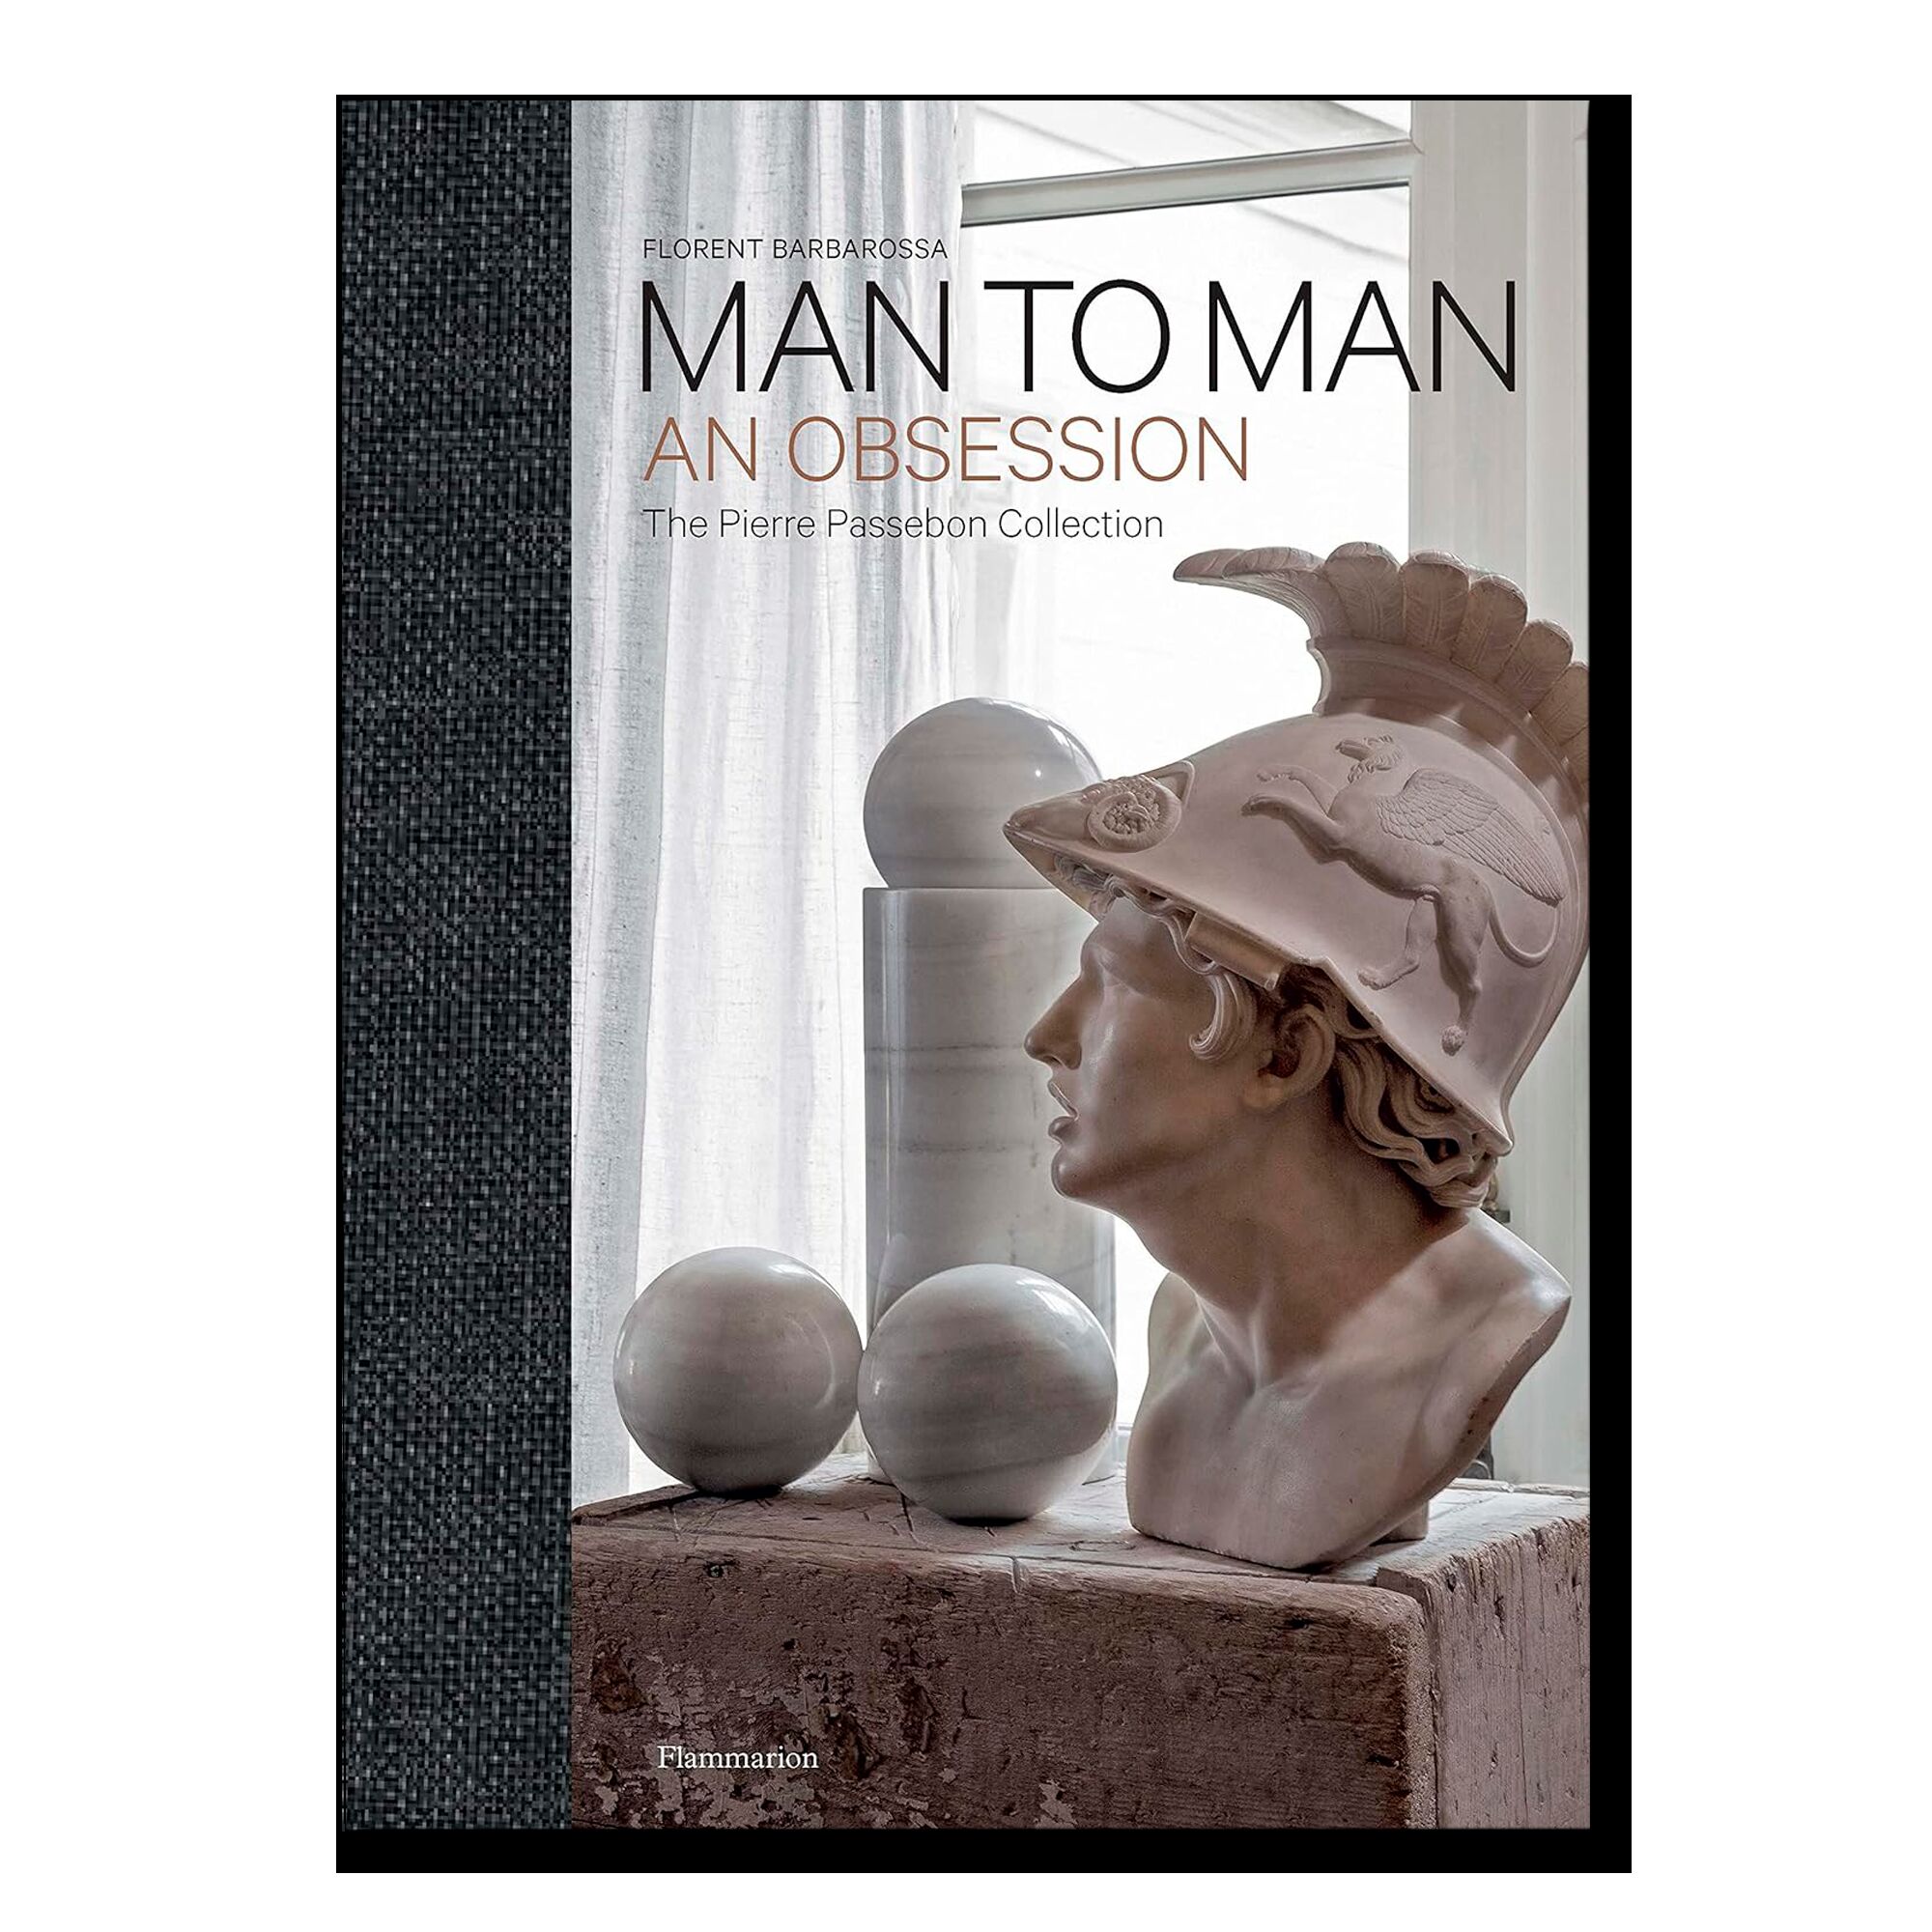 Man to Man: An Obsession